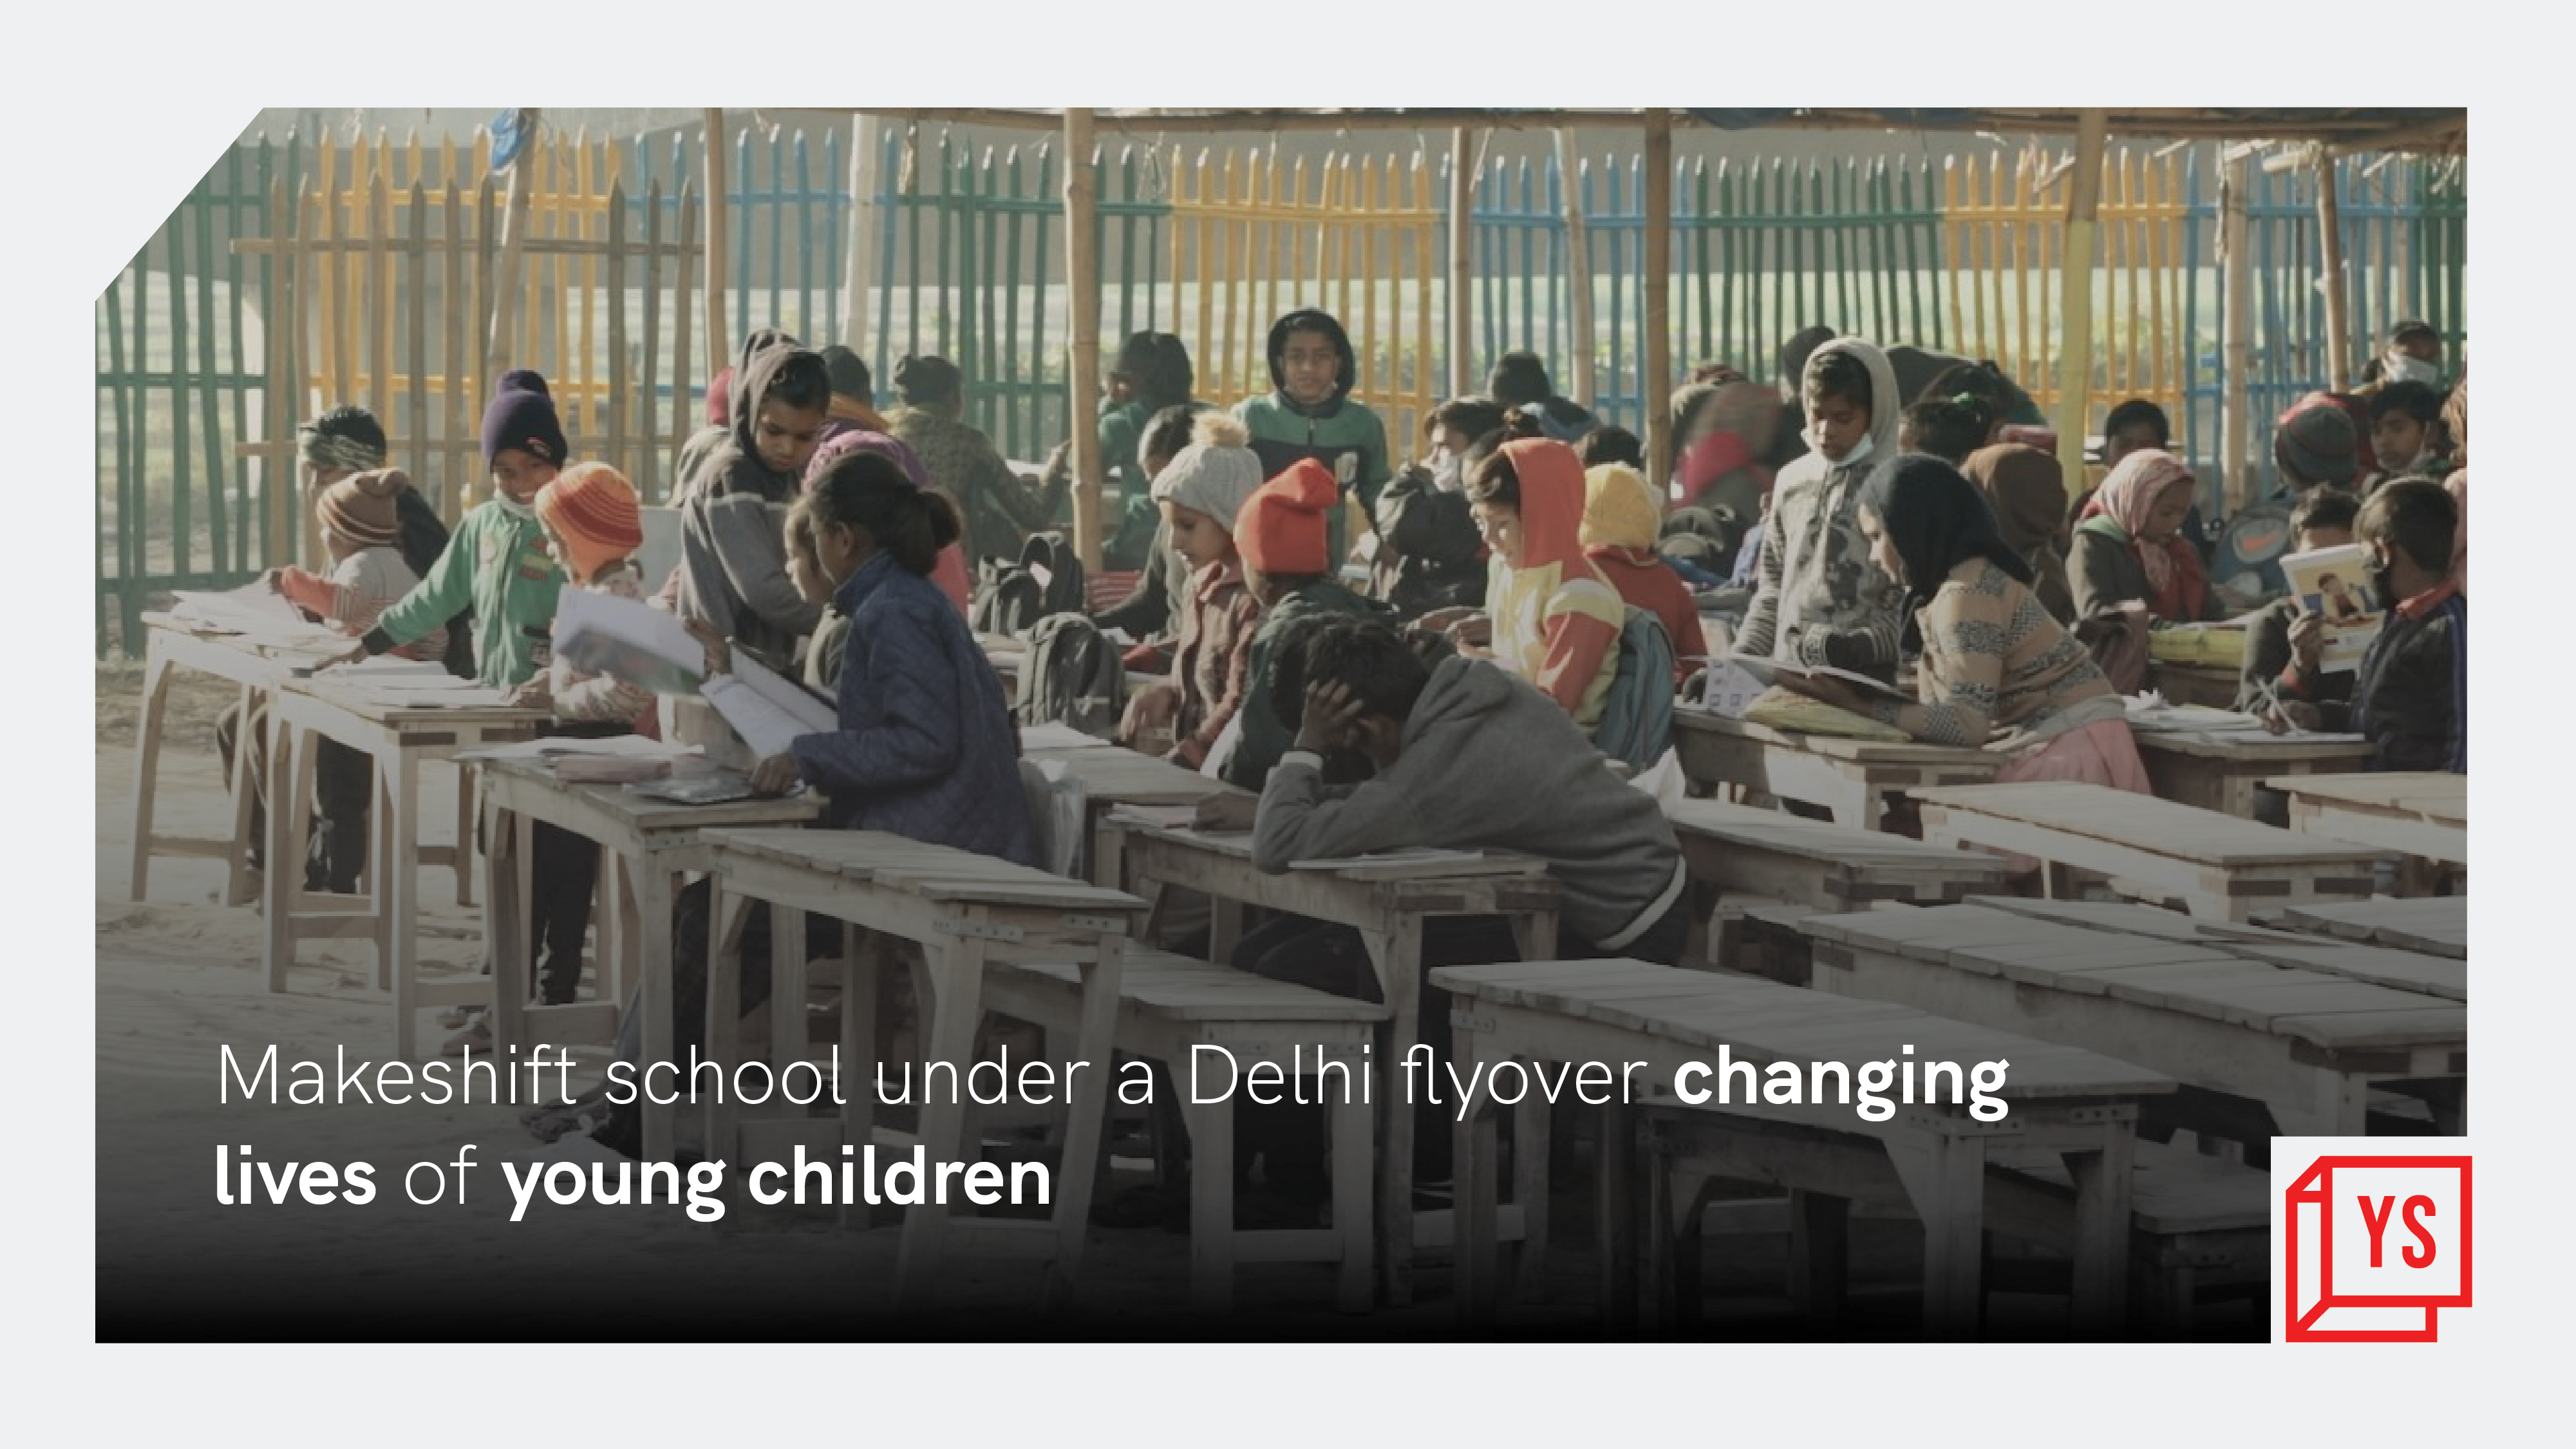 Under a Delhi flyover, Van Phool School is changing the lives of young children
